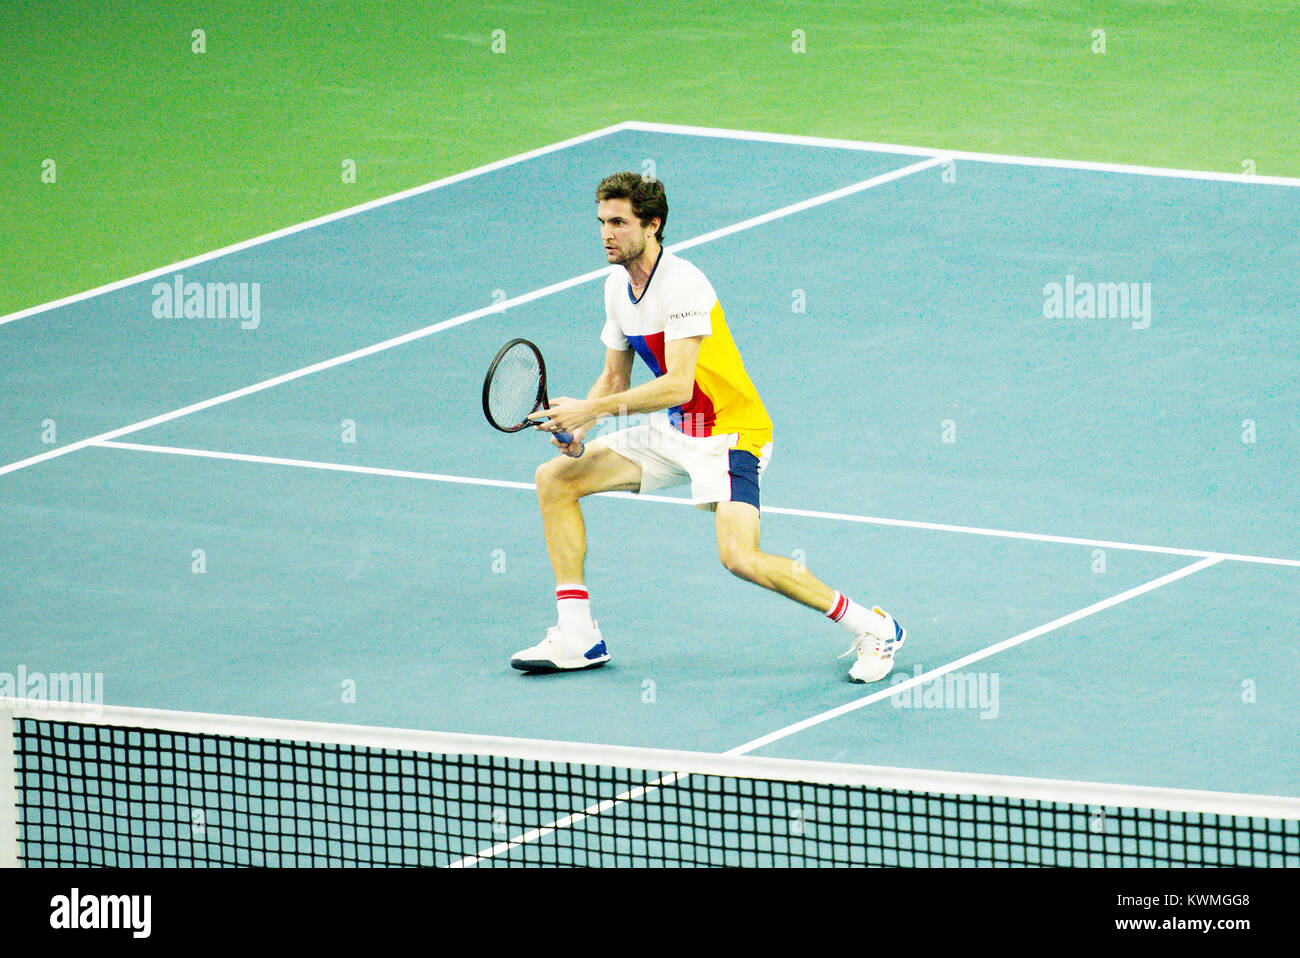 Pune, India. 3rd January 2018. Gilles Simon of France in action in the second round of Singles competition at Tata Open Maharashtra at the Mahalunge Balewadi Tennis Stadium in Pune, India. Credit: Karunesh Johri/Alamy Live News. Stock Photo